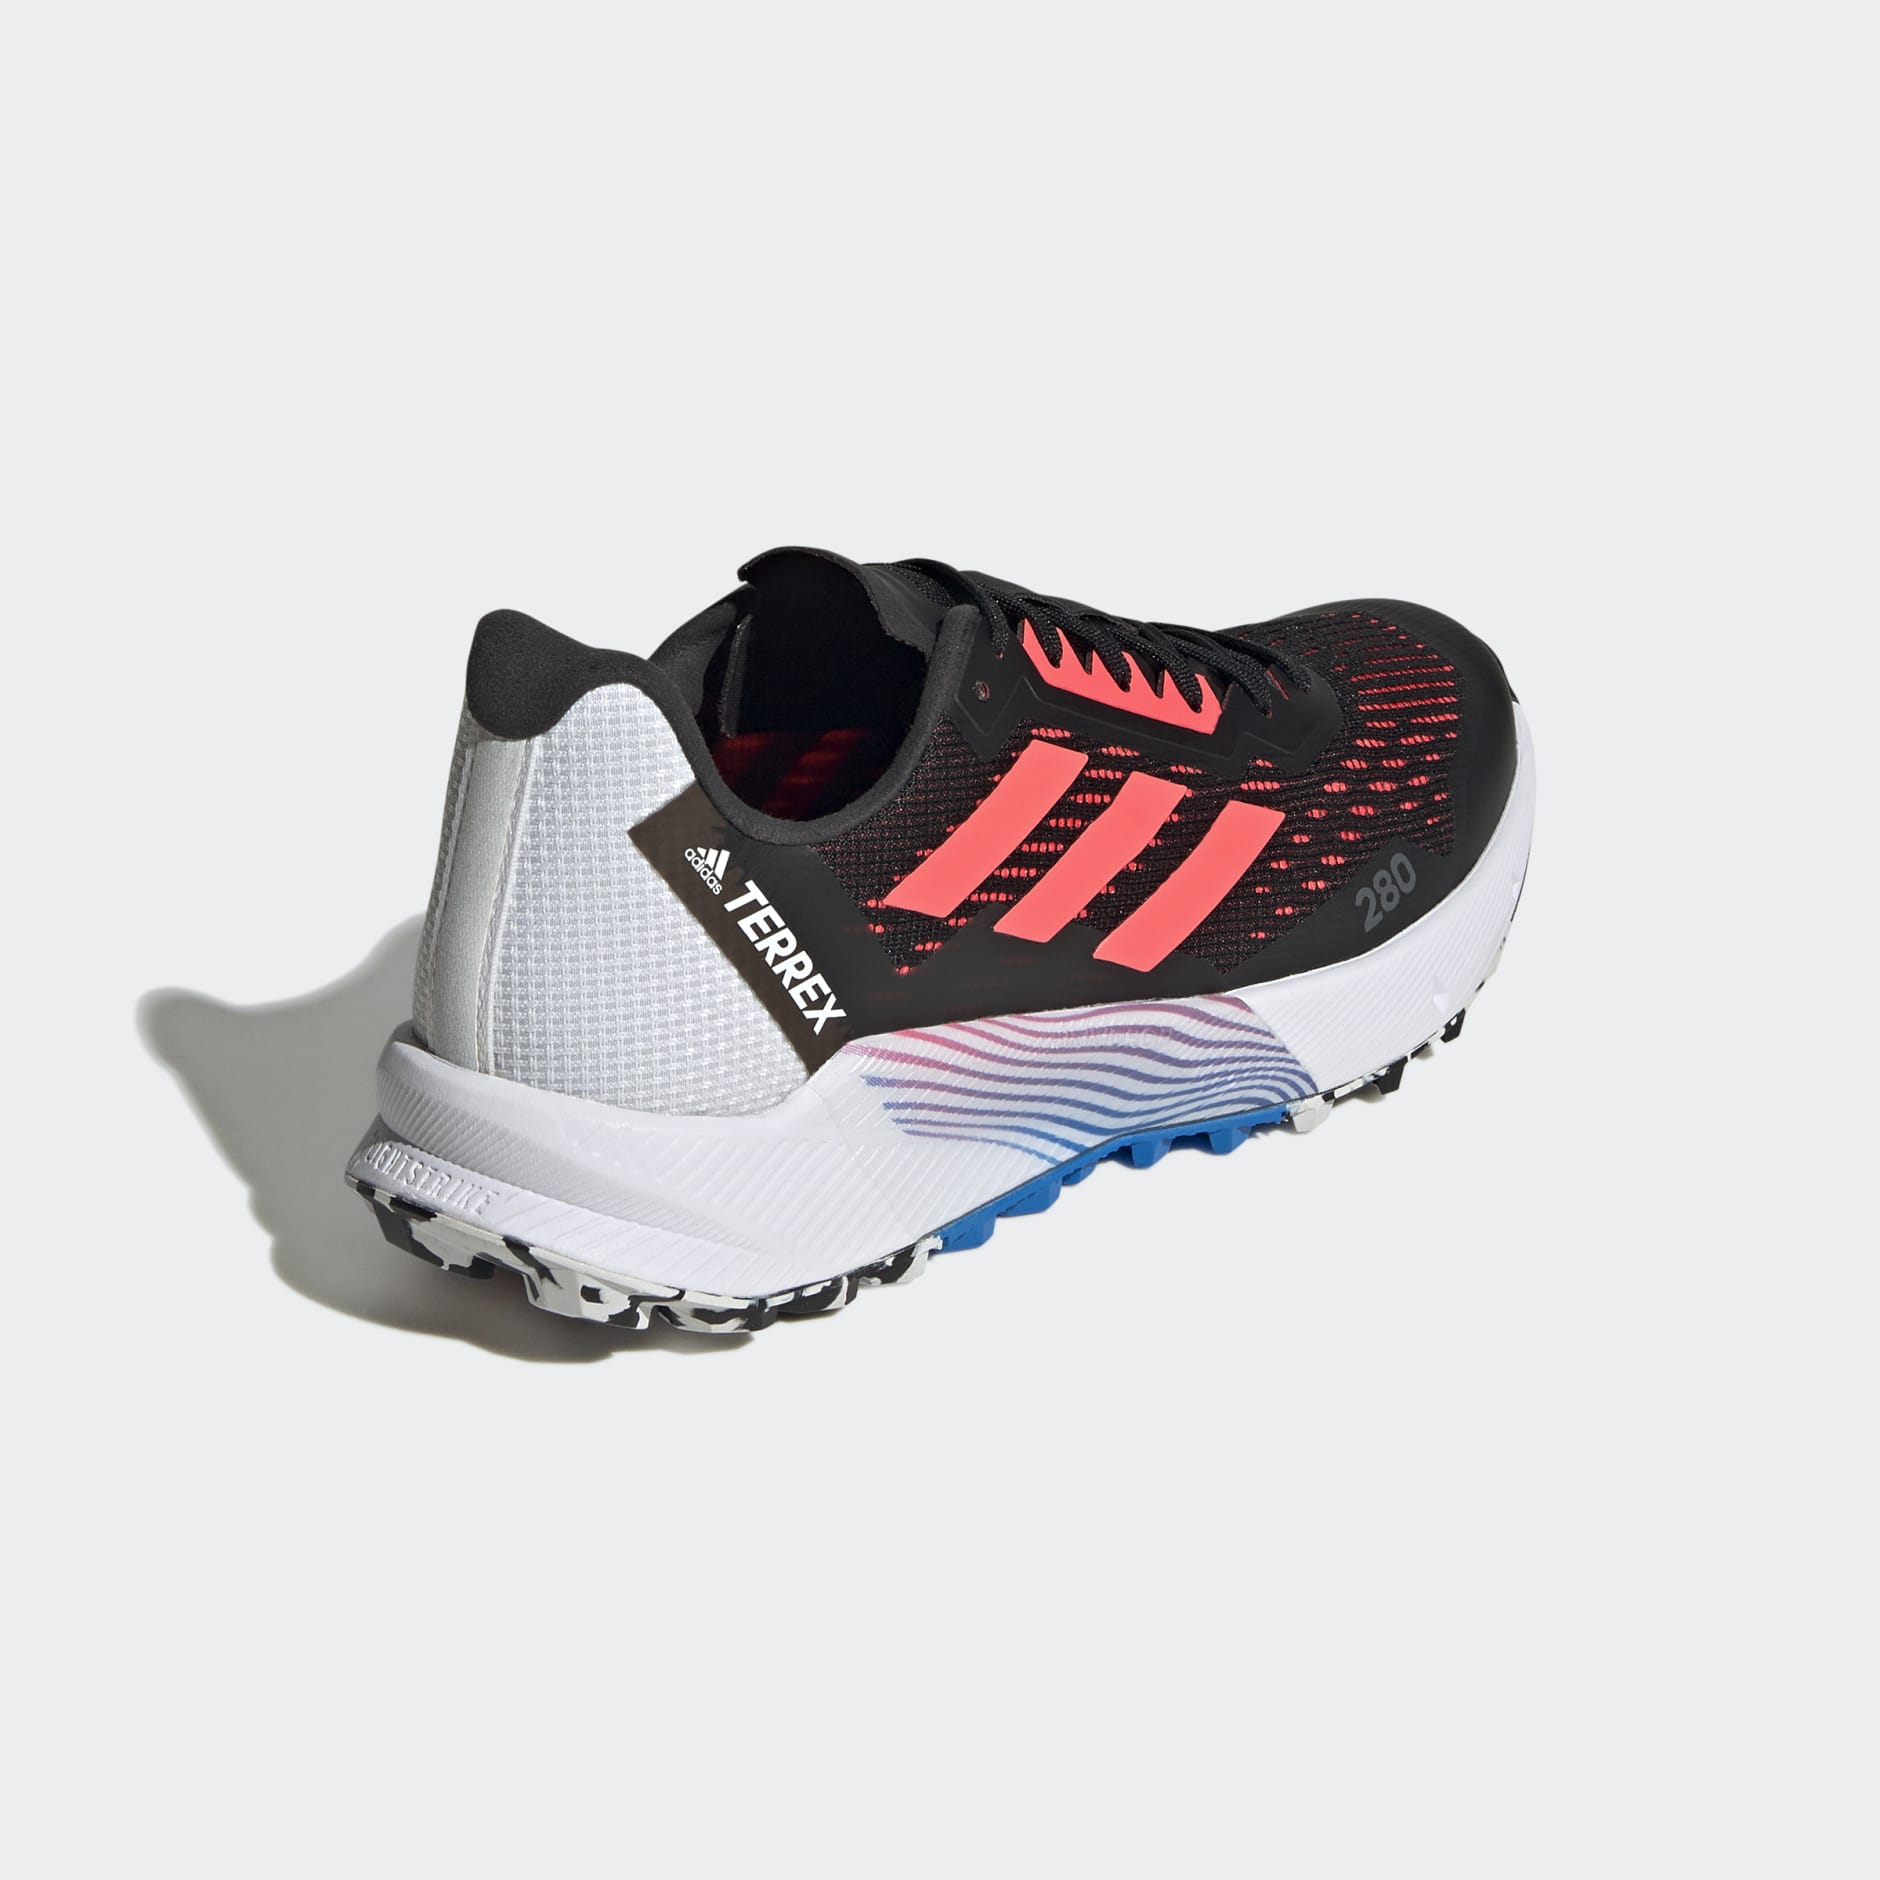 Shoes - TERREX AGRAVIC FLOW 2 TRAIL RUNNING SHOES - Black | adidas ...